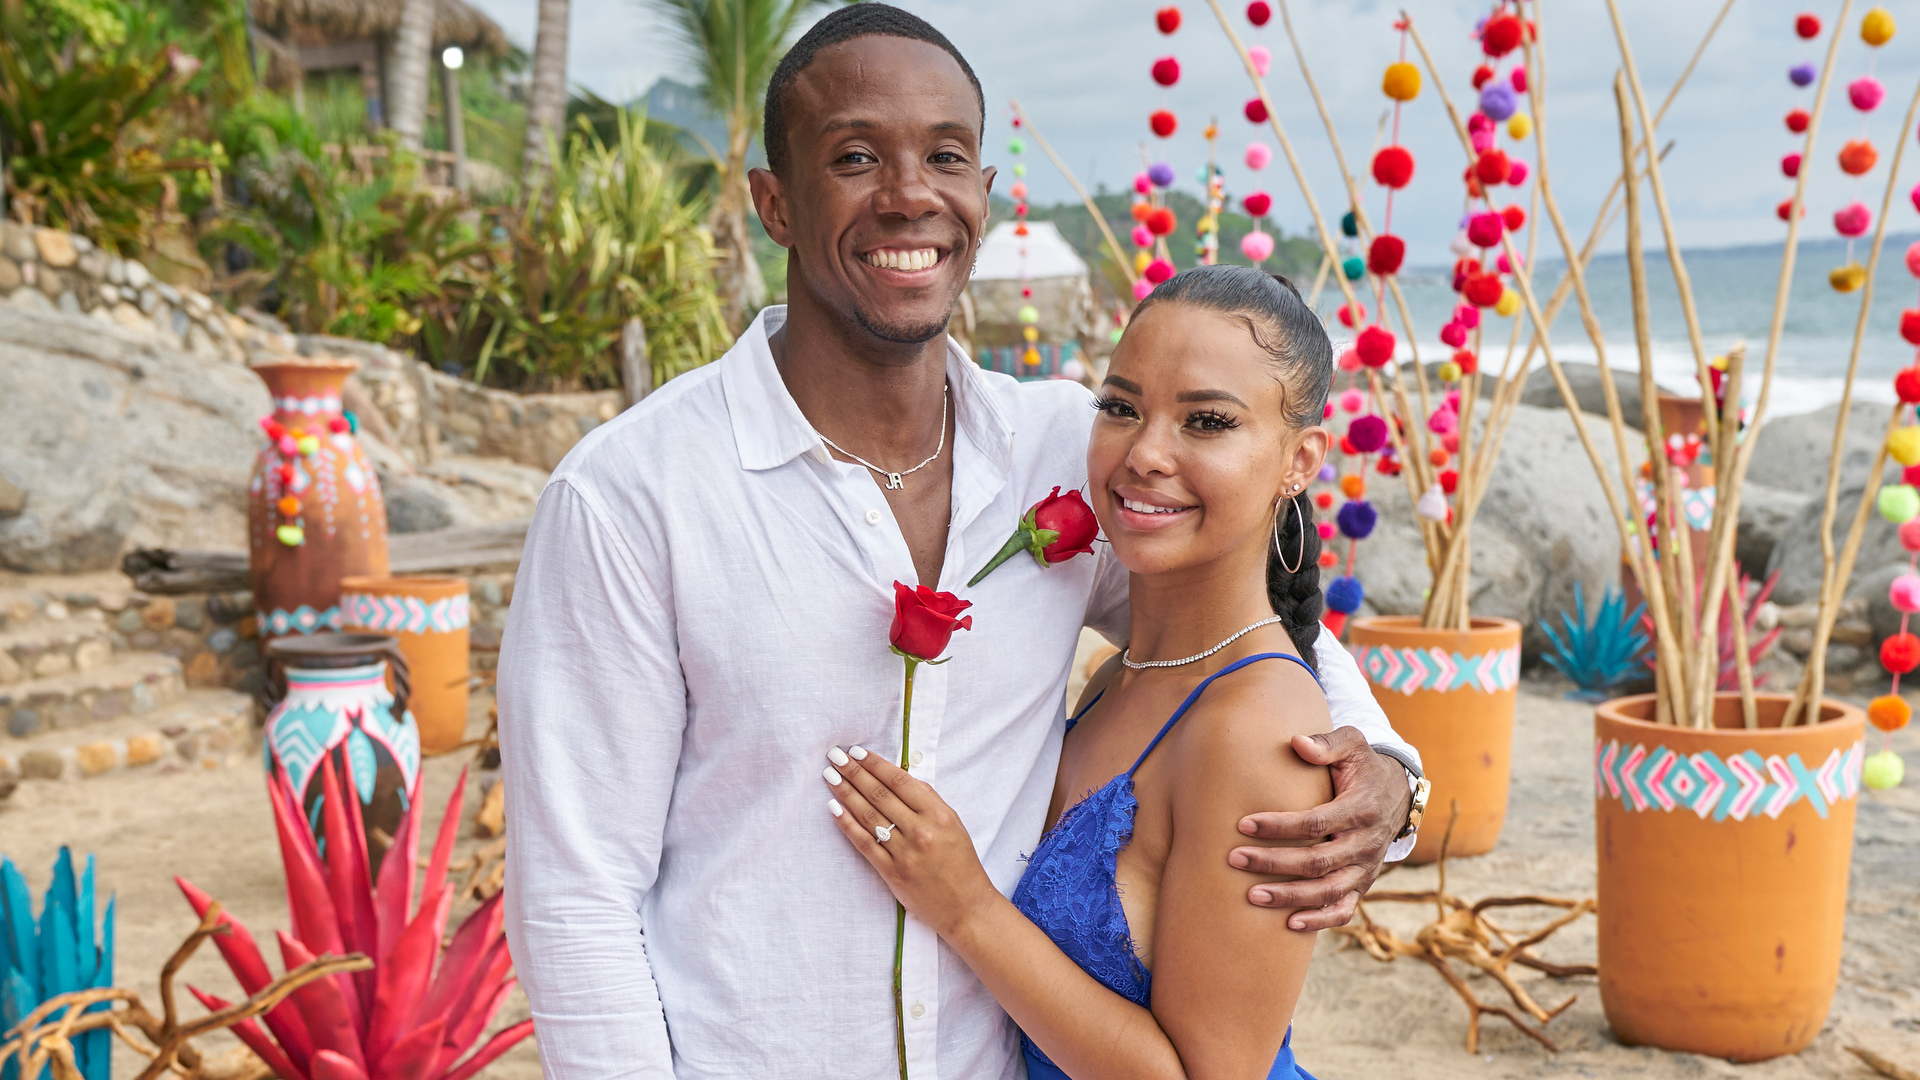 Riley Christian and Maurissa Gunn pose together with their engagement ring in the ‘Bachelor in Paradise’ Season 7 finale in 2021